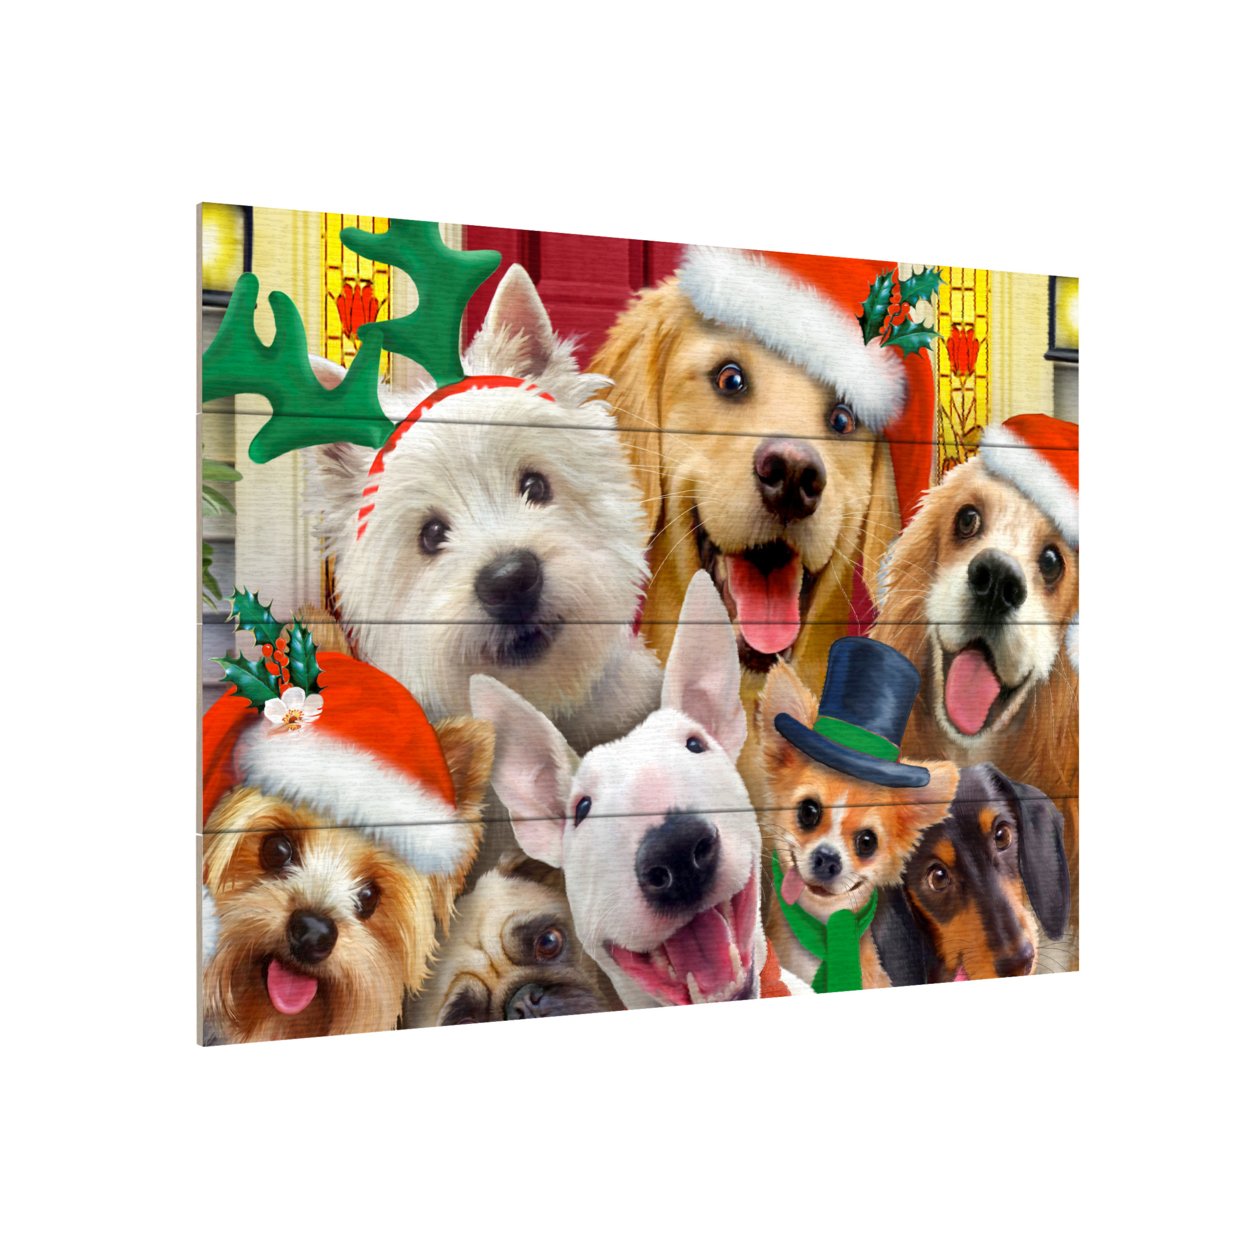 Wall Art 12 X 16 Inches Titled Christmas Dogs Ready To Hang Printed On Wooden Planks